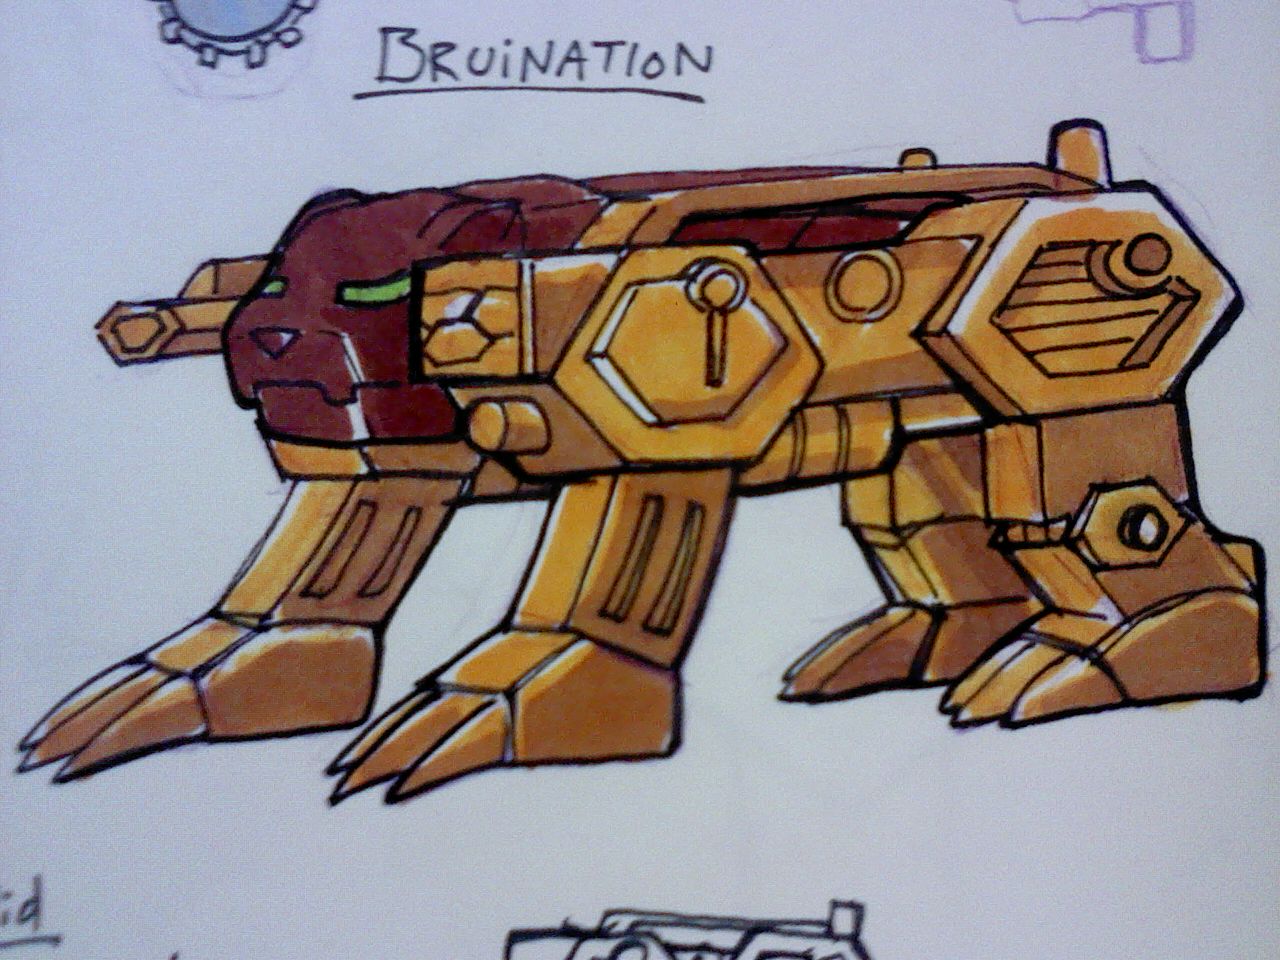 Early concept sketch called Bruination